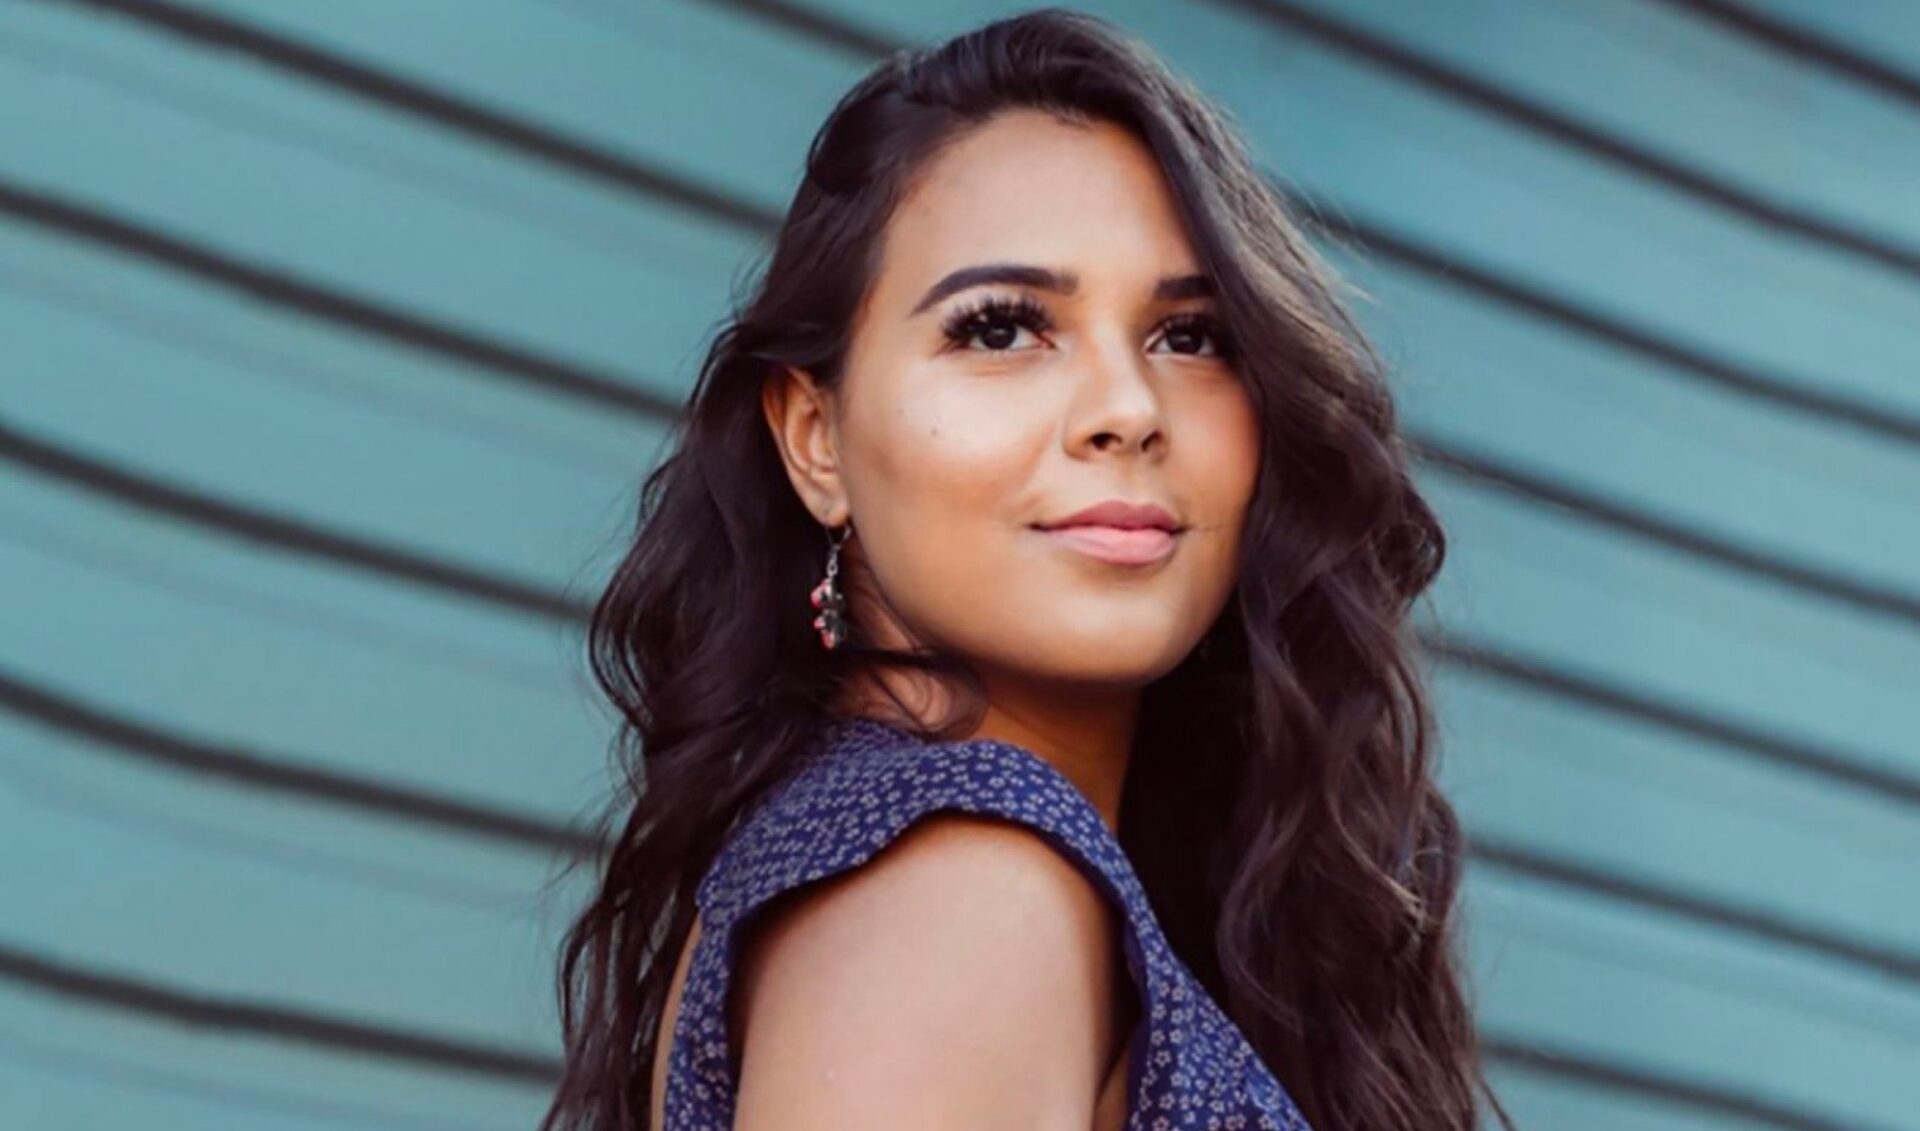 Snap enlists Natalie Alzate to host $10,000 Spotlight Challenge during Latin Heritage Month